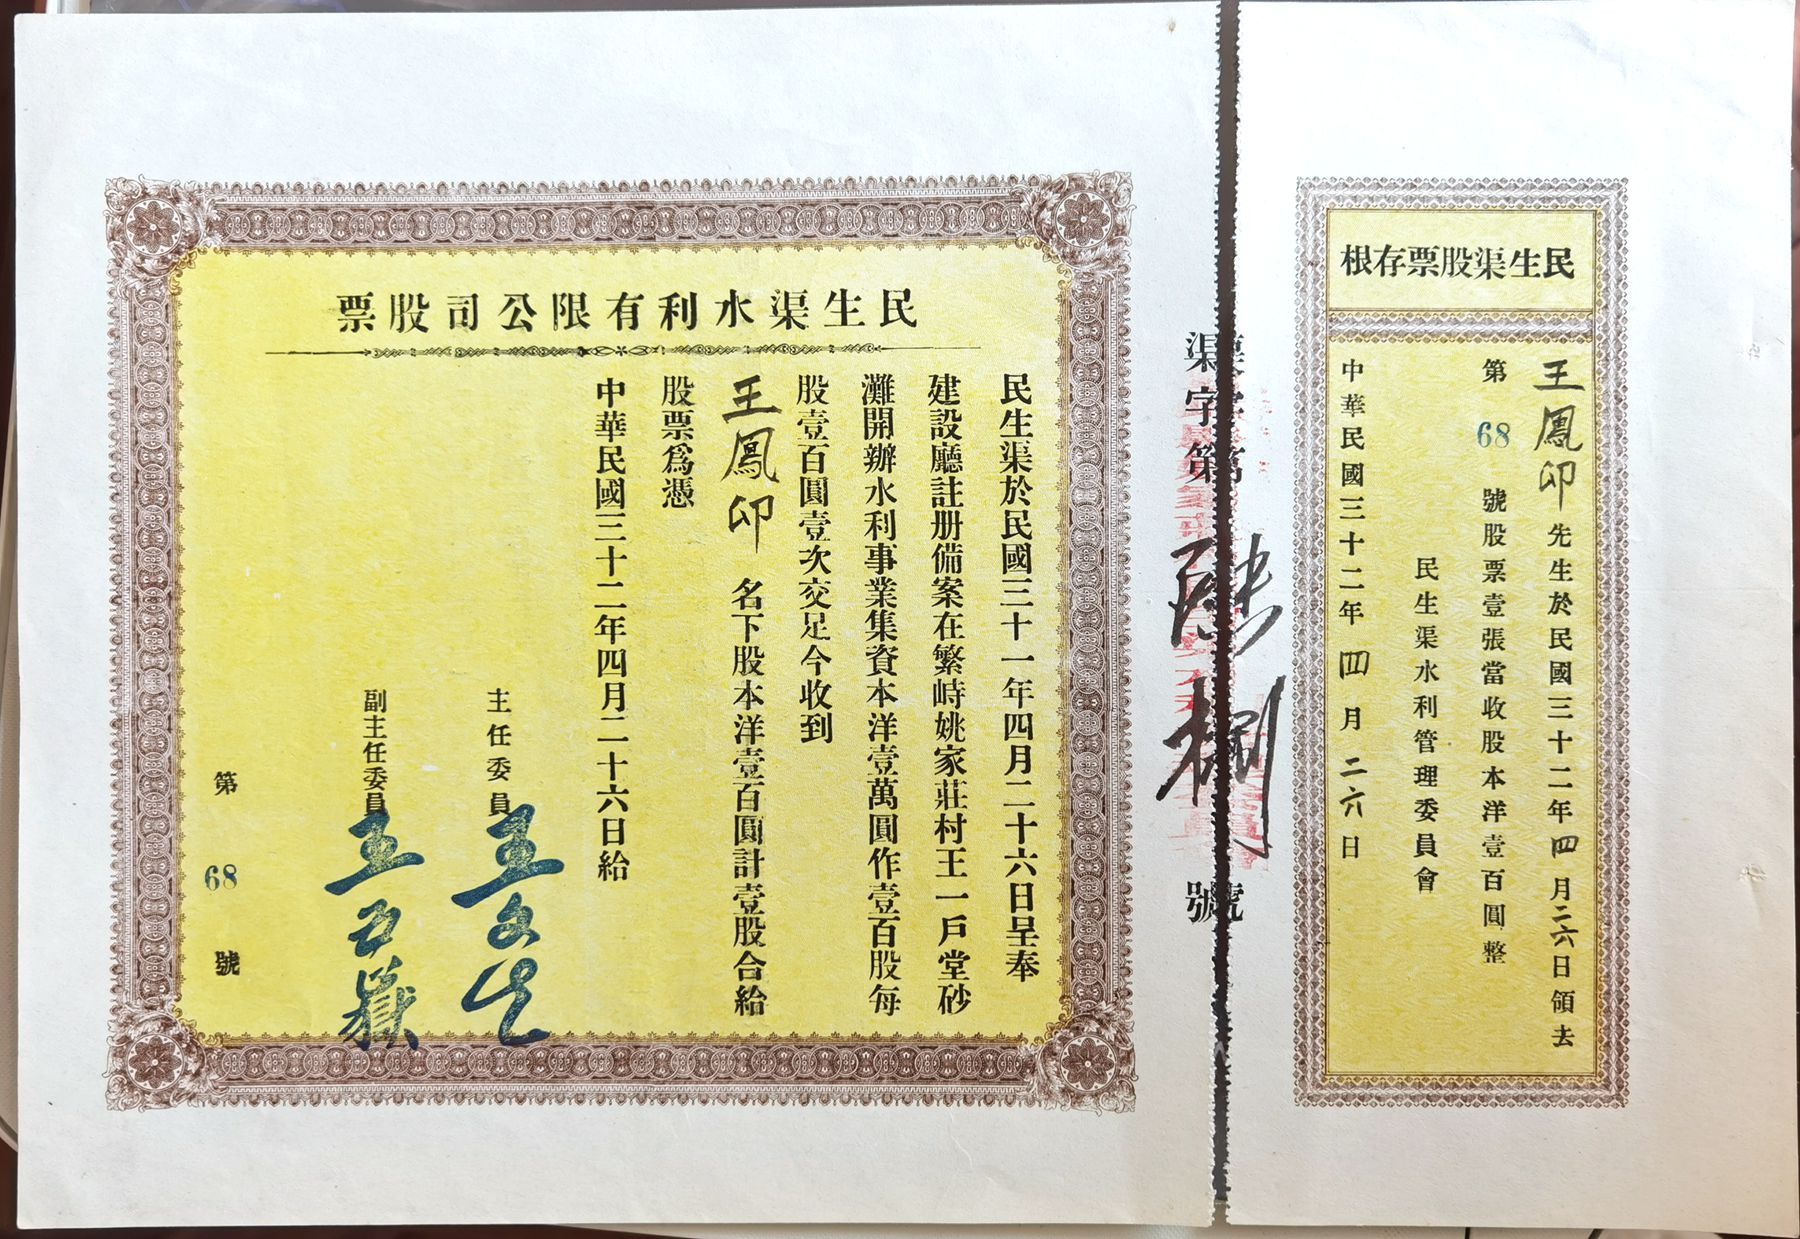 S1452, China Shanxi Province Democracy Canal, Stock Certificate 100 Silver Dollars, 1942